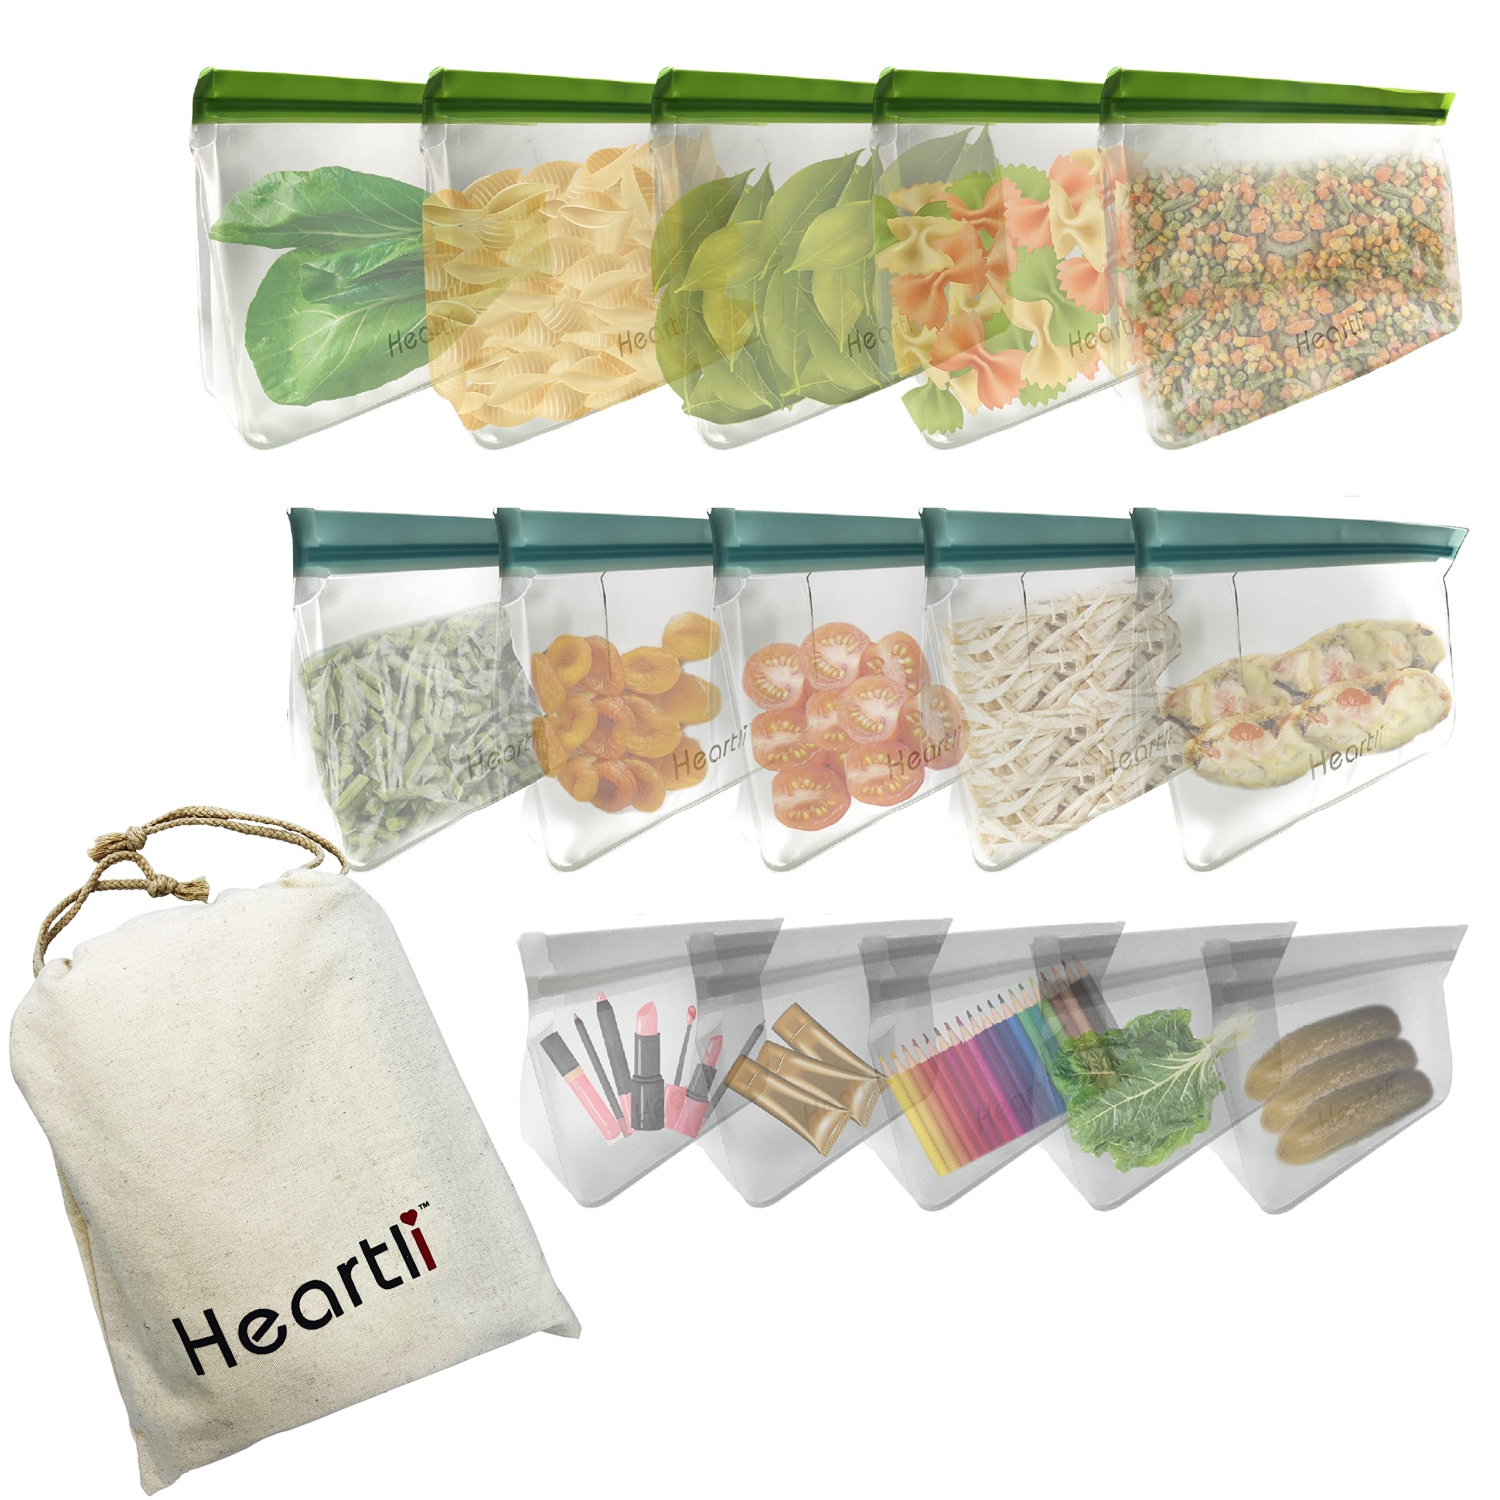 Heartli Eco-Friendly Food Grade Silicone Reusable Stand-Up Food Storage Bags - BPA-Free, Leak-Proof, Freezer Safe For Meat, Fruit, Veggies, More - 15 Pack Includes Bonus Cotton Bag